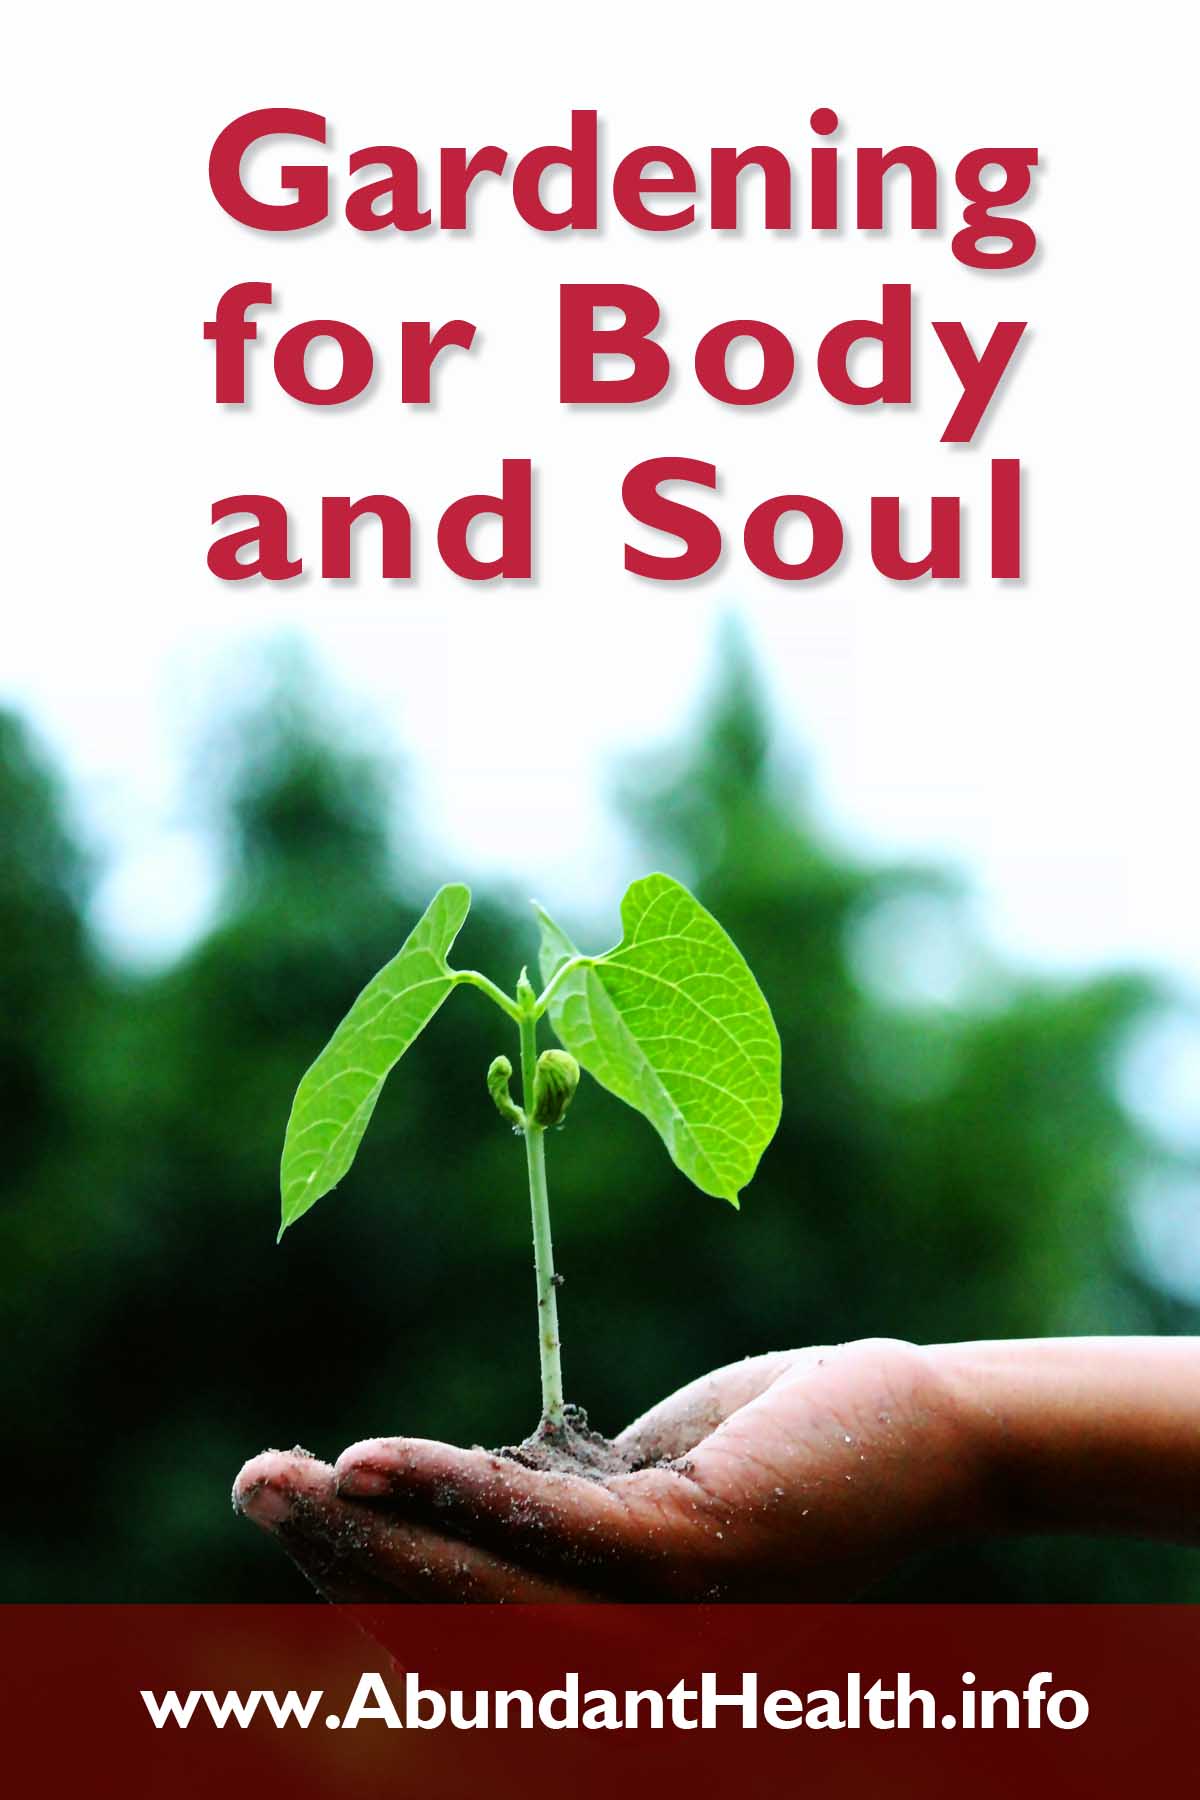 Gardening for Body and Soul